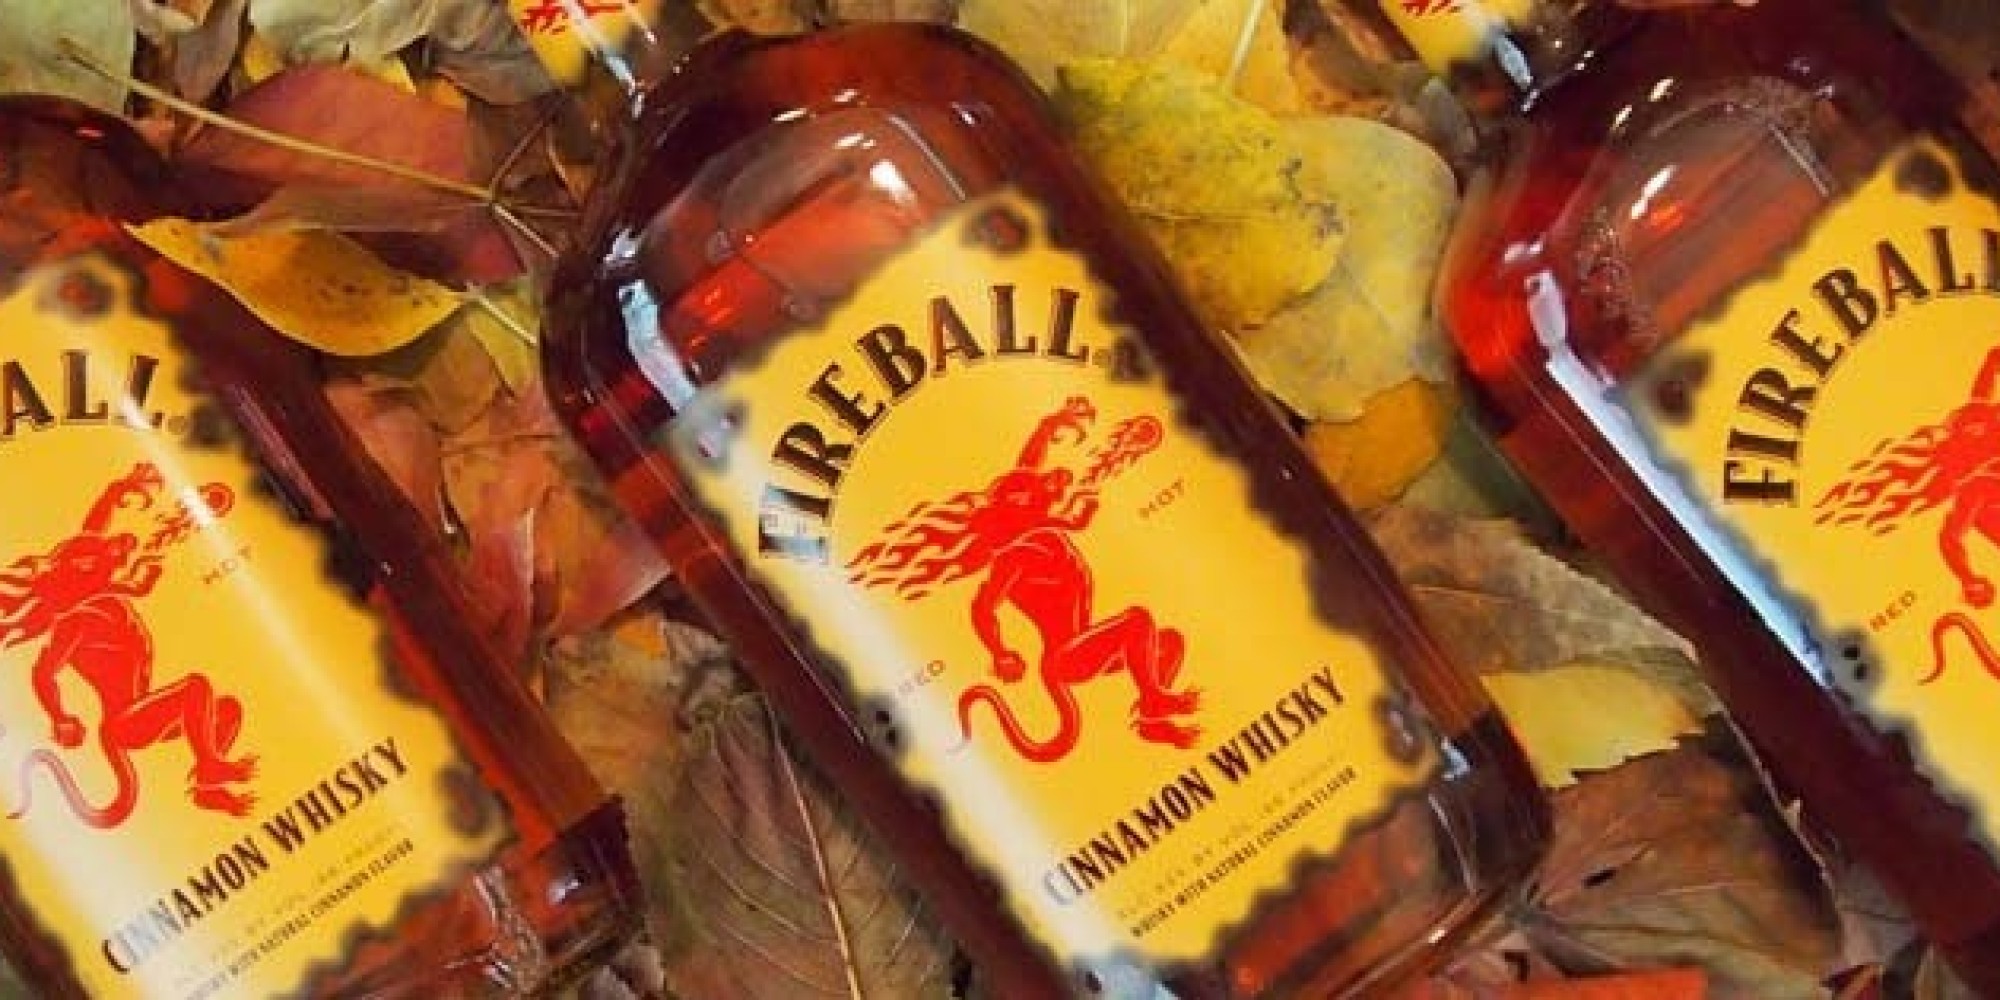 Fireball Whisky Recalled In 3 Countries Over Antifreeze Ingredient